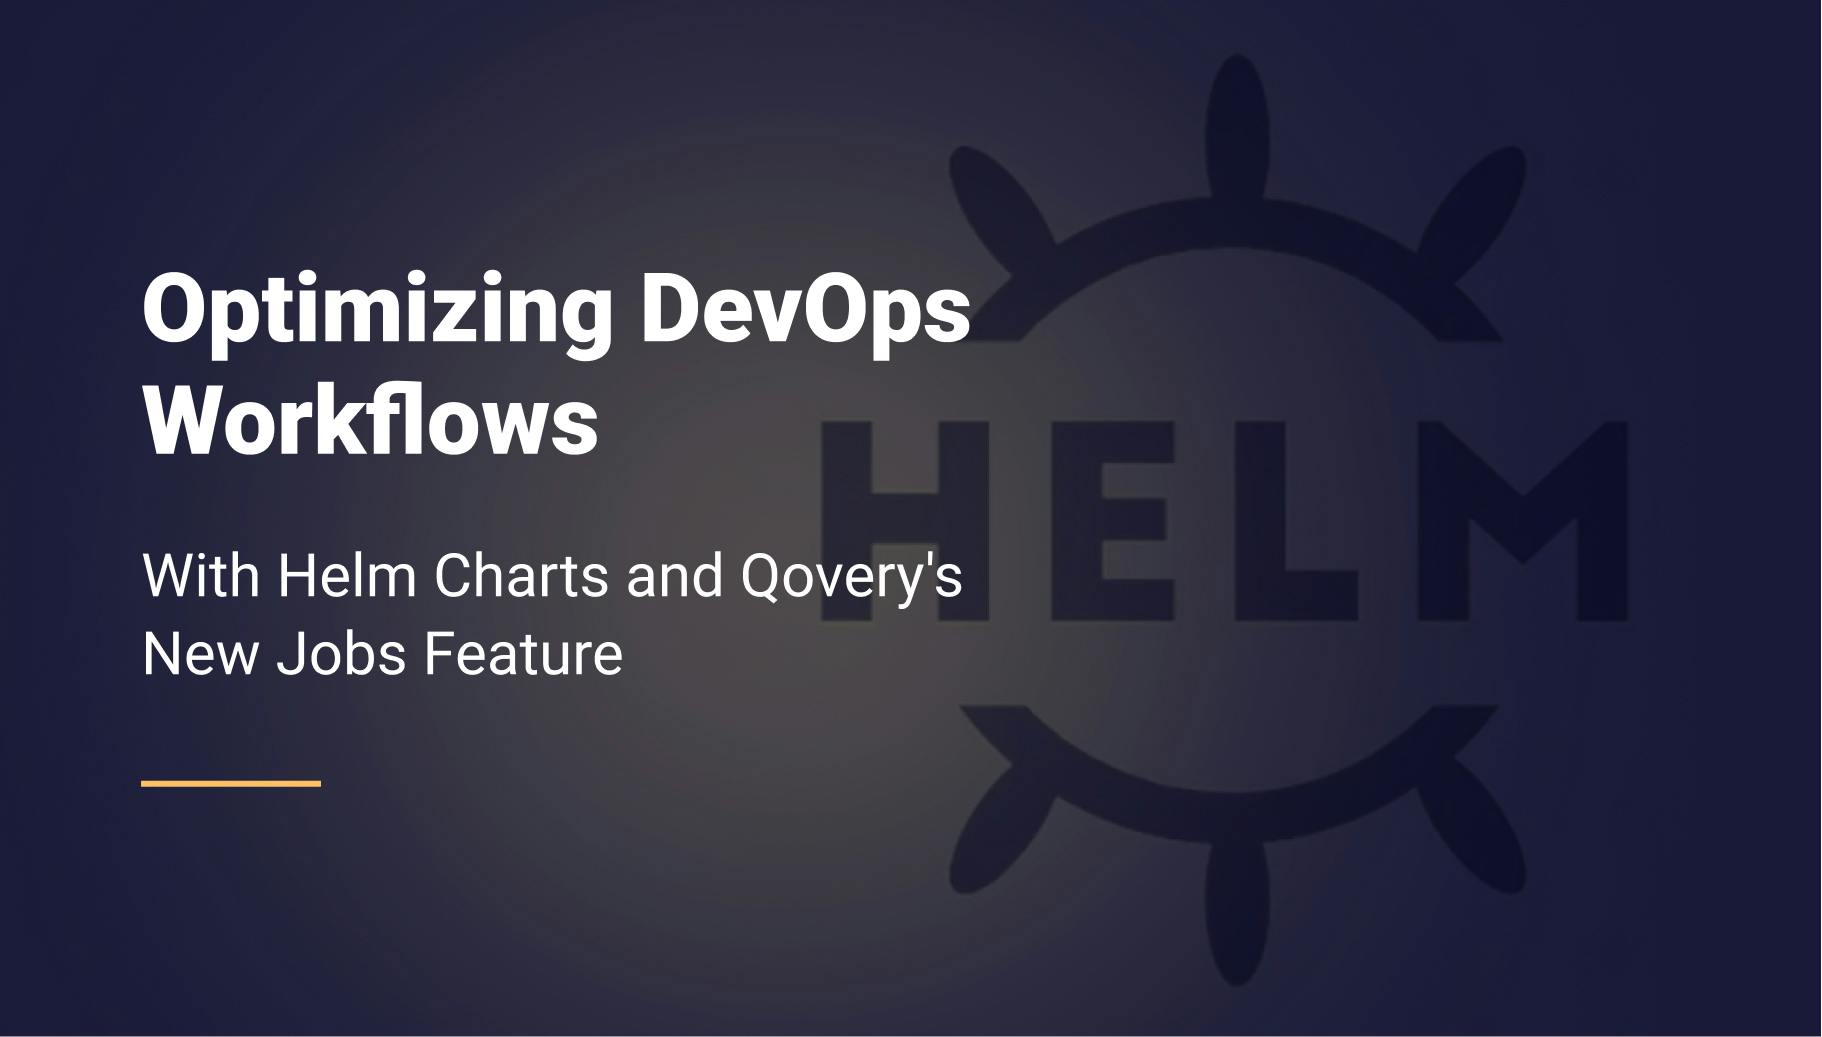 Optimizing DevOps Workflows with Helm Charts and Qovery's New Jobs Feature - Qovery